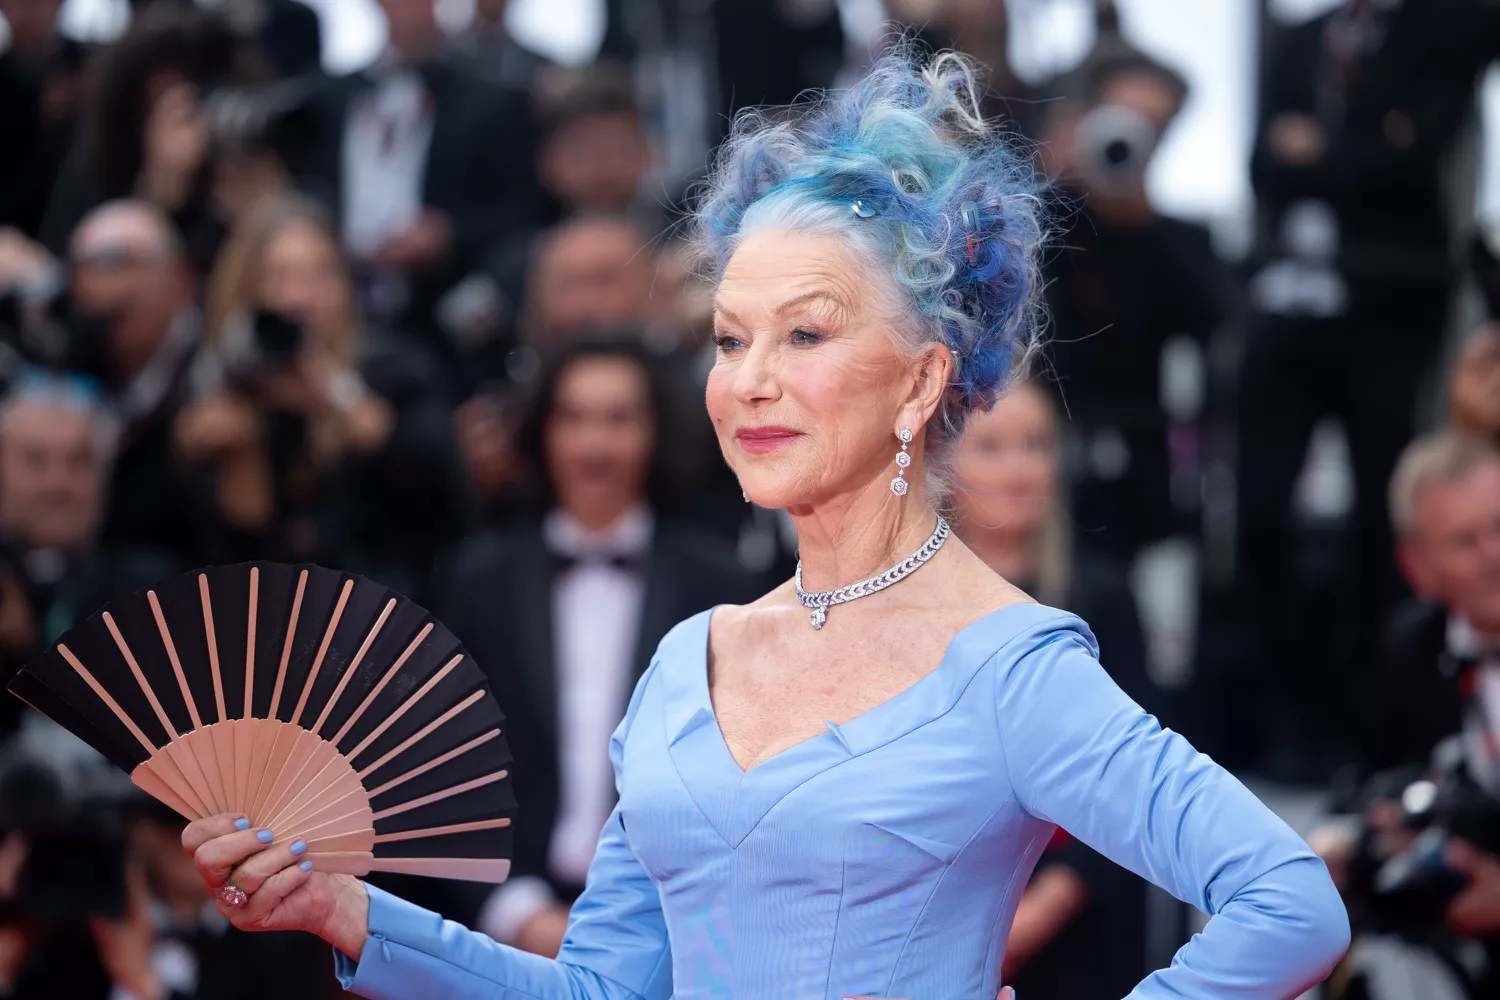 Helen Mirren holding fan at the 2023 Cannes film festival in blue gown and hair